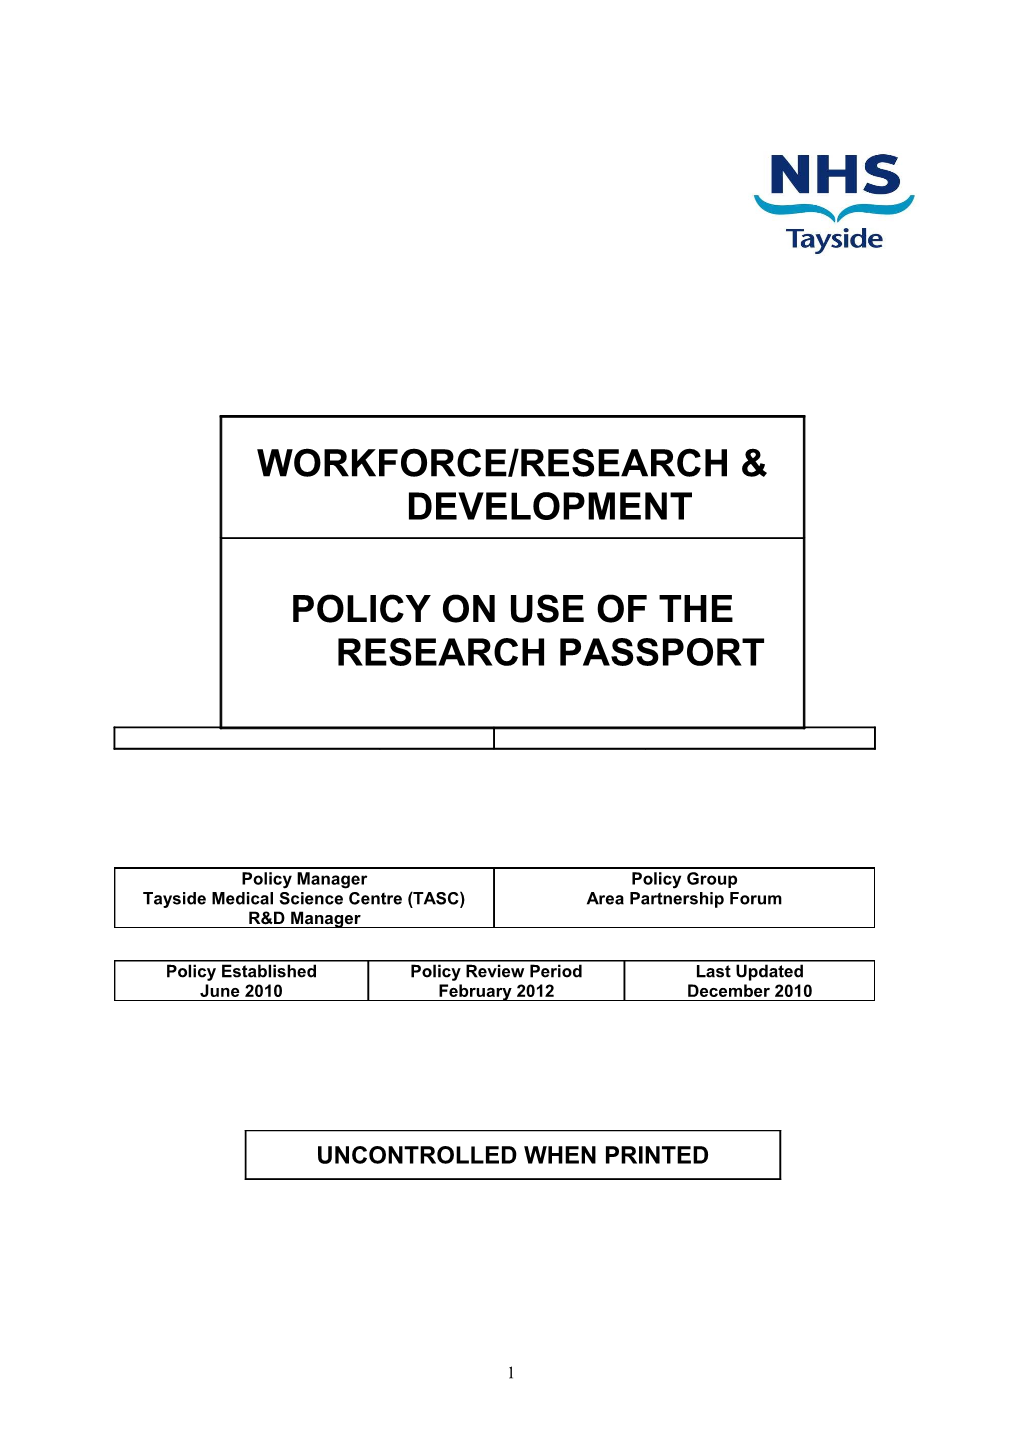 Policy on Use of the Research Passport